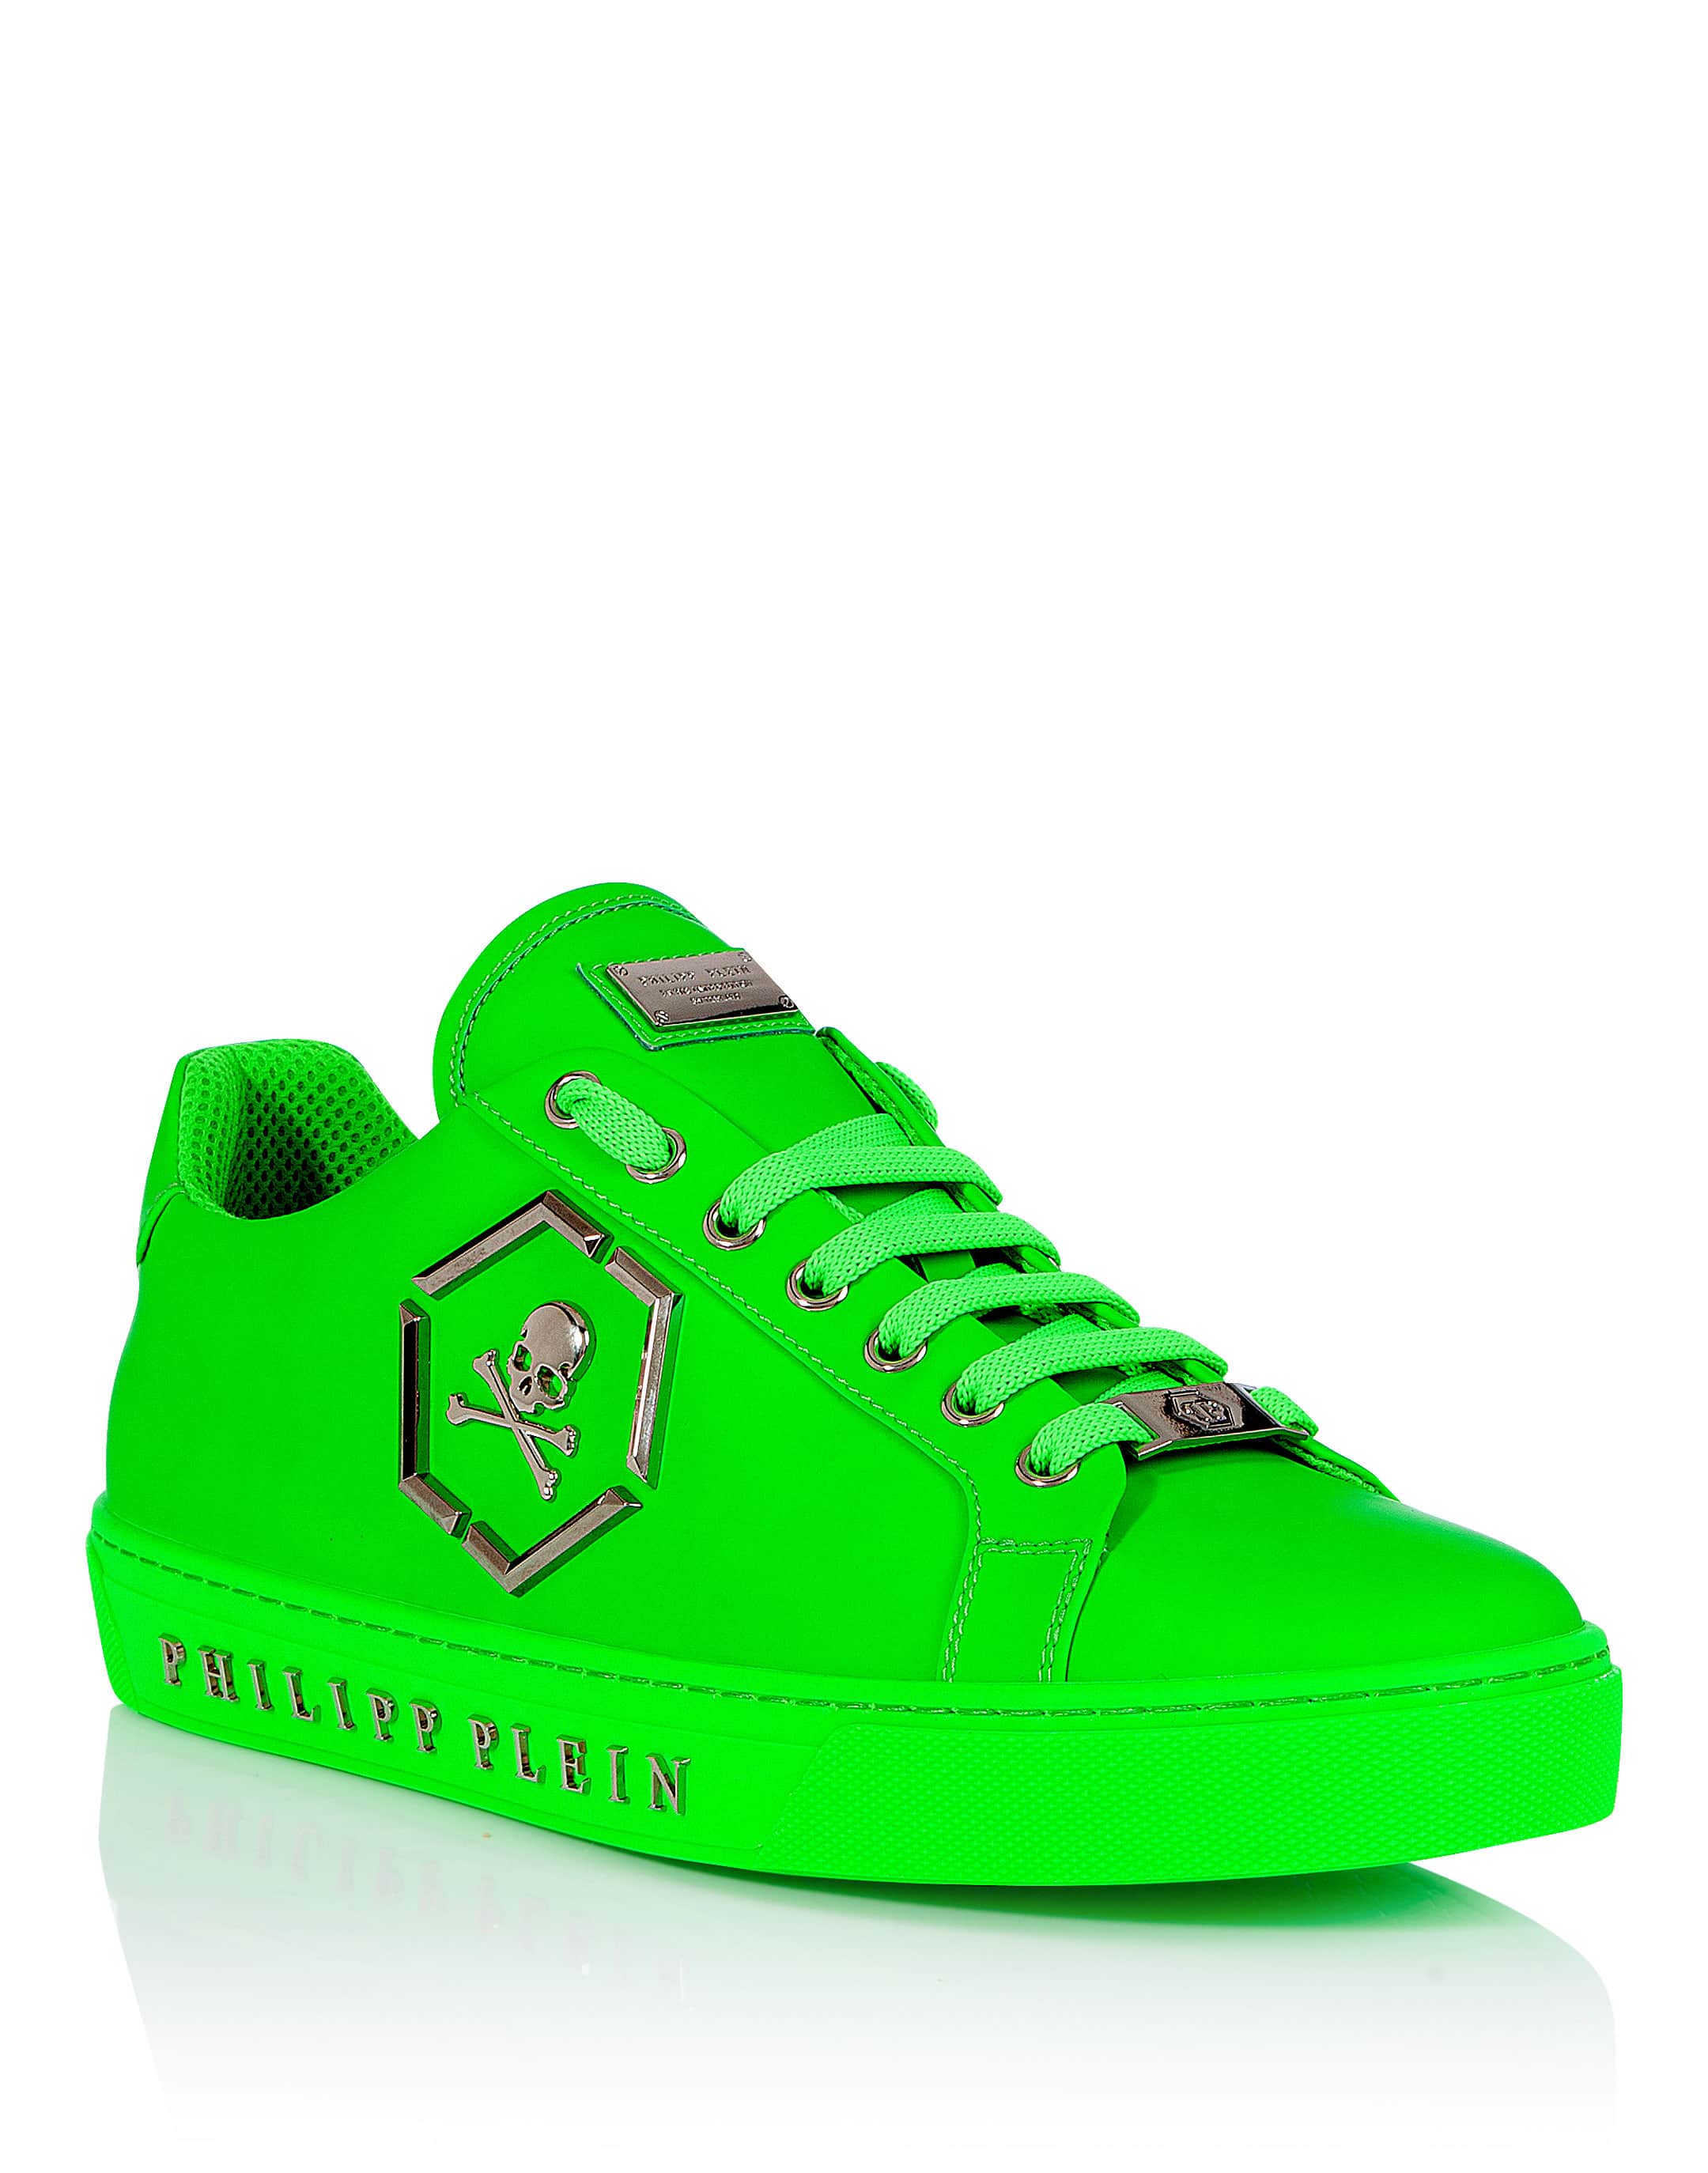 Lo-Top Sneakers "Flames fluo version" | Philipp Plein Outlet